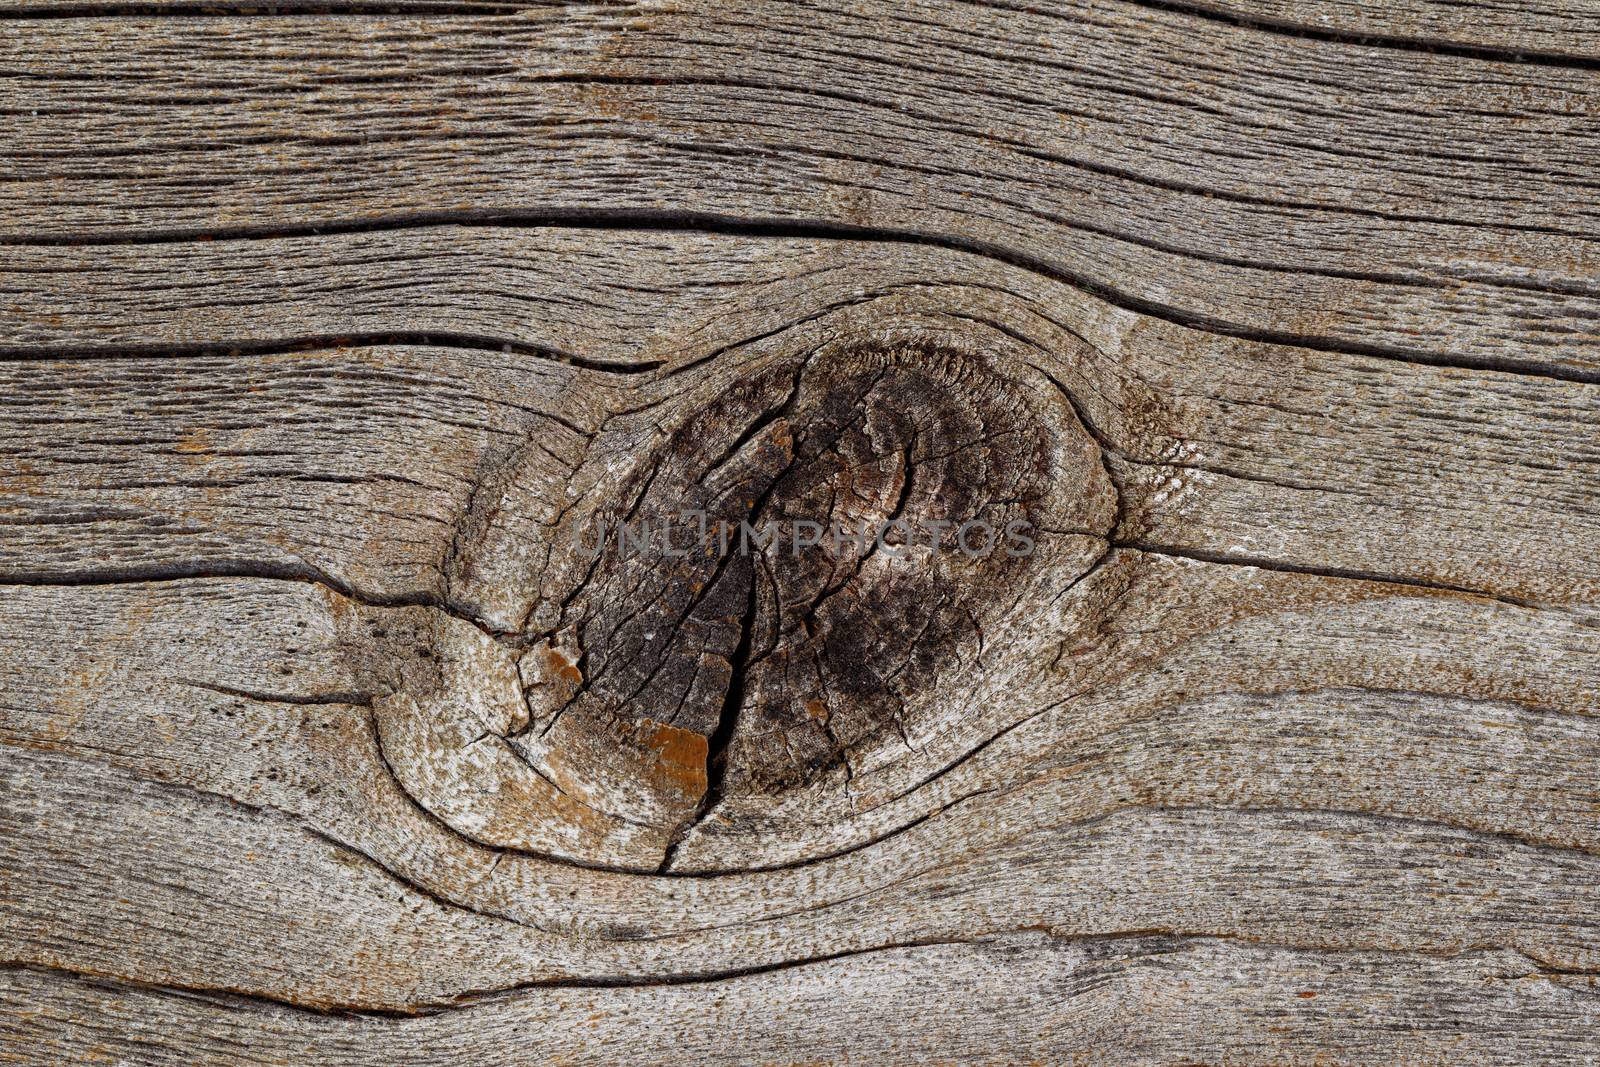 Close up of weathered wood with knot in center